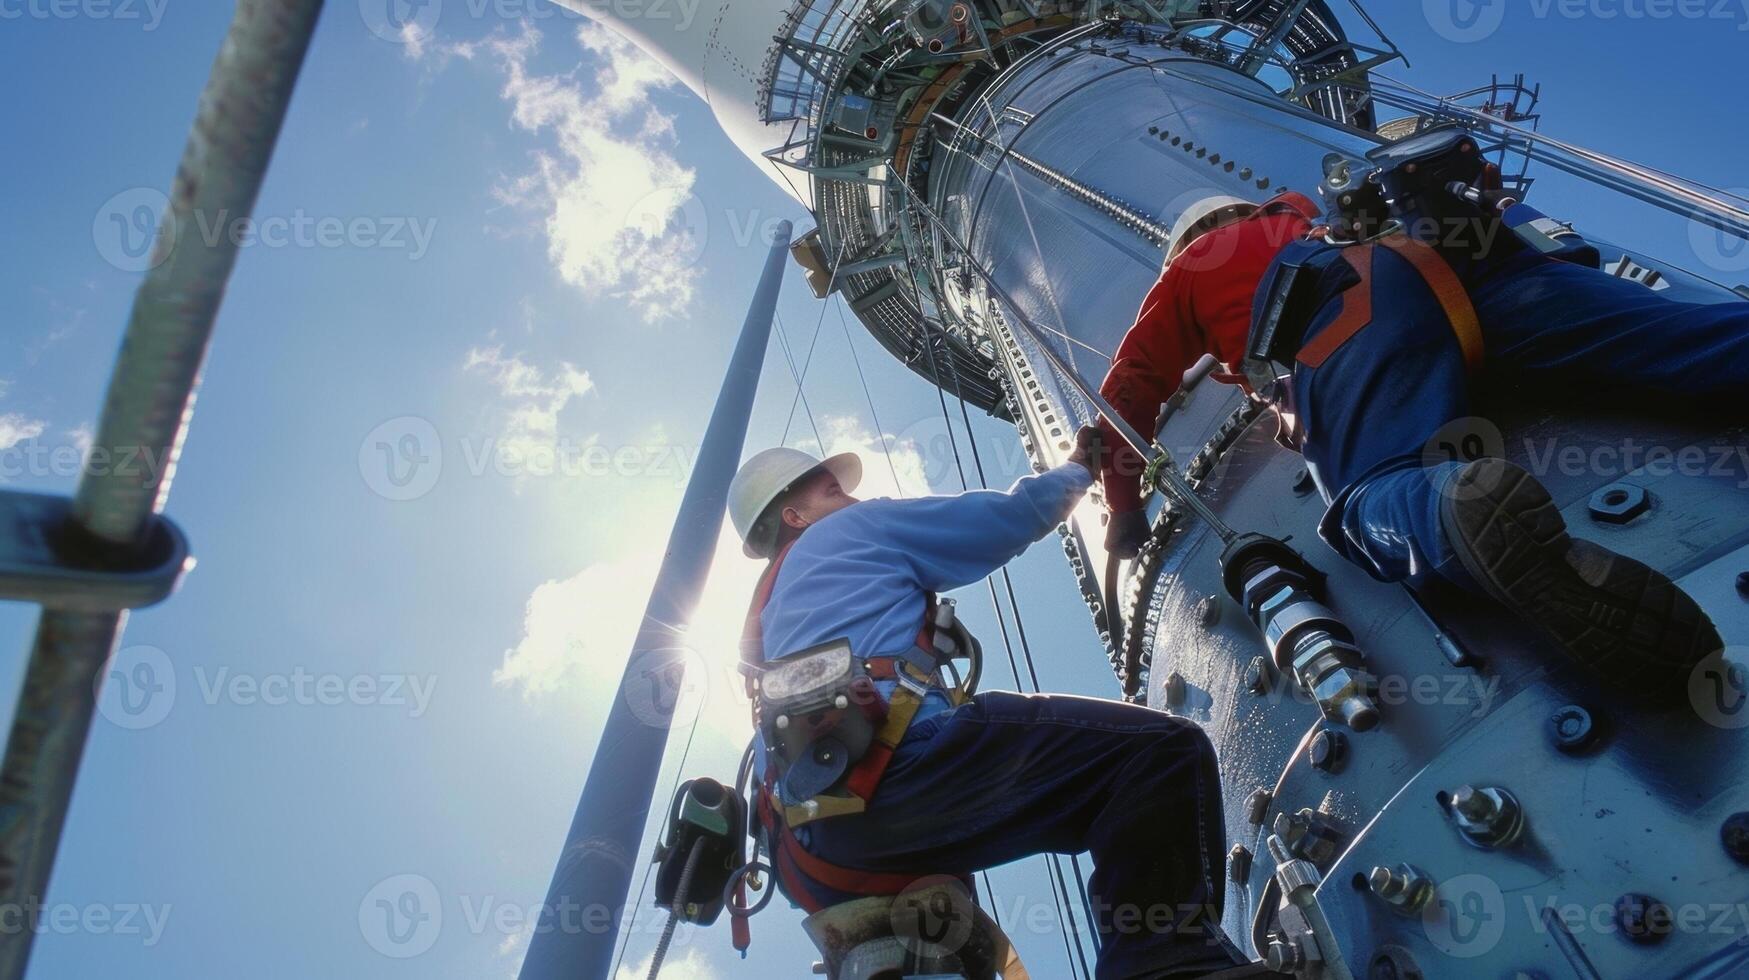 A lole shot of workers installing the final bolts on the base of the turbine tower as it reaches towards the sky photo